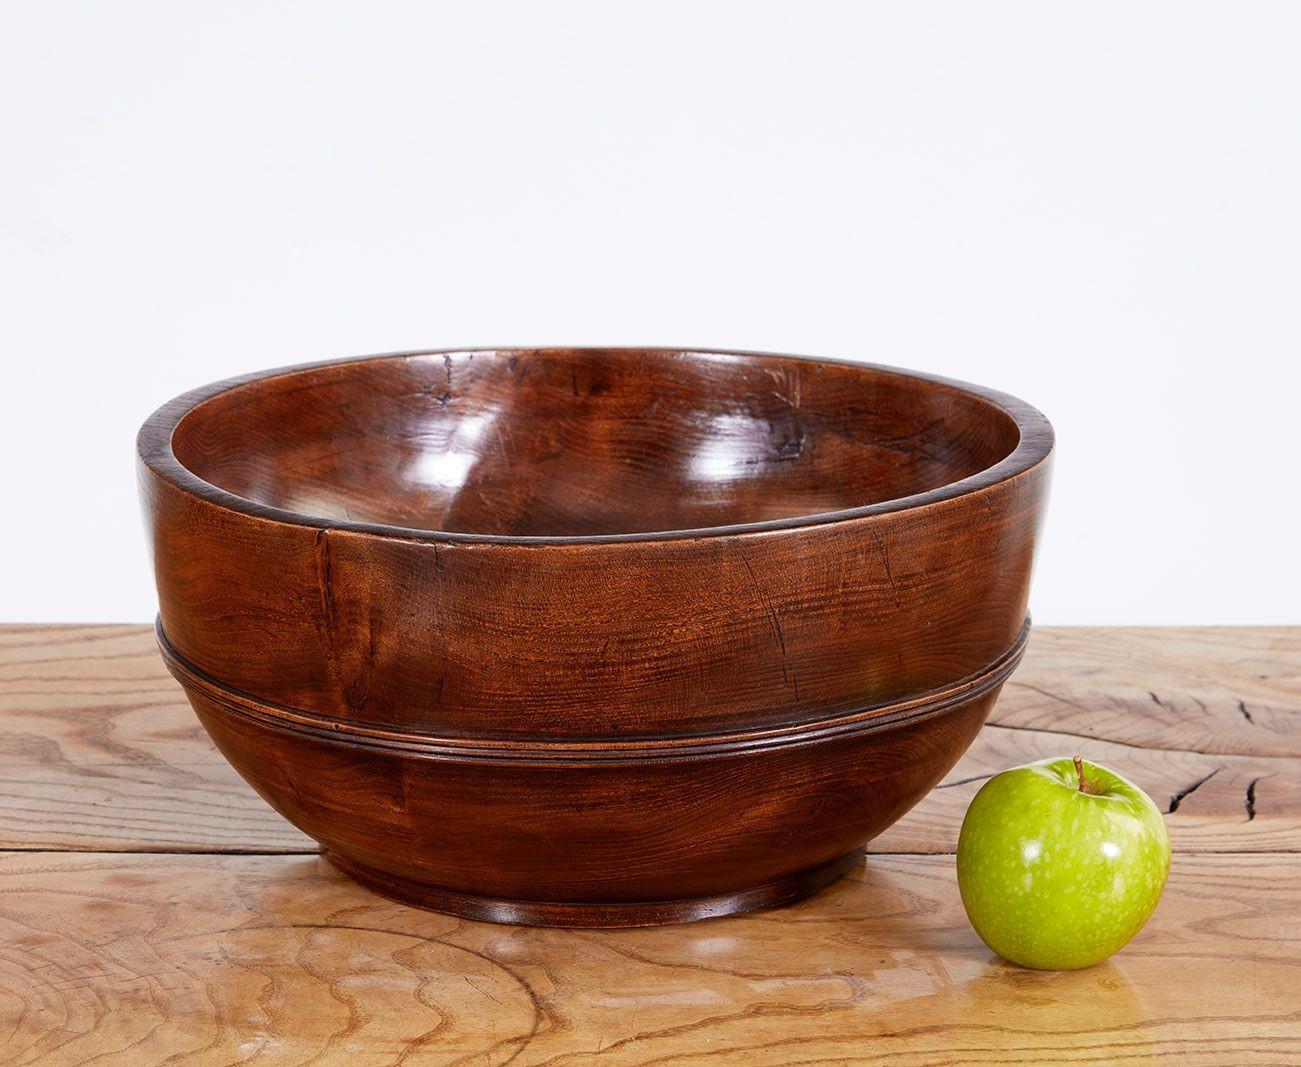 Fine early 19th century Welsh turned ash harvest bowl, having deep basin, the waist with turned band, the whole possessing good rich color and patination.